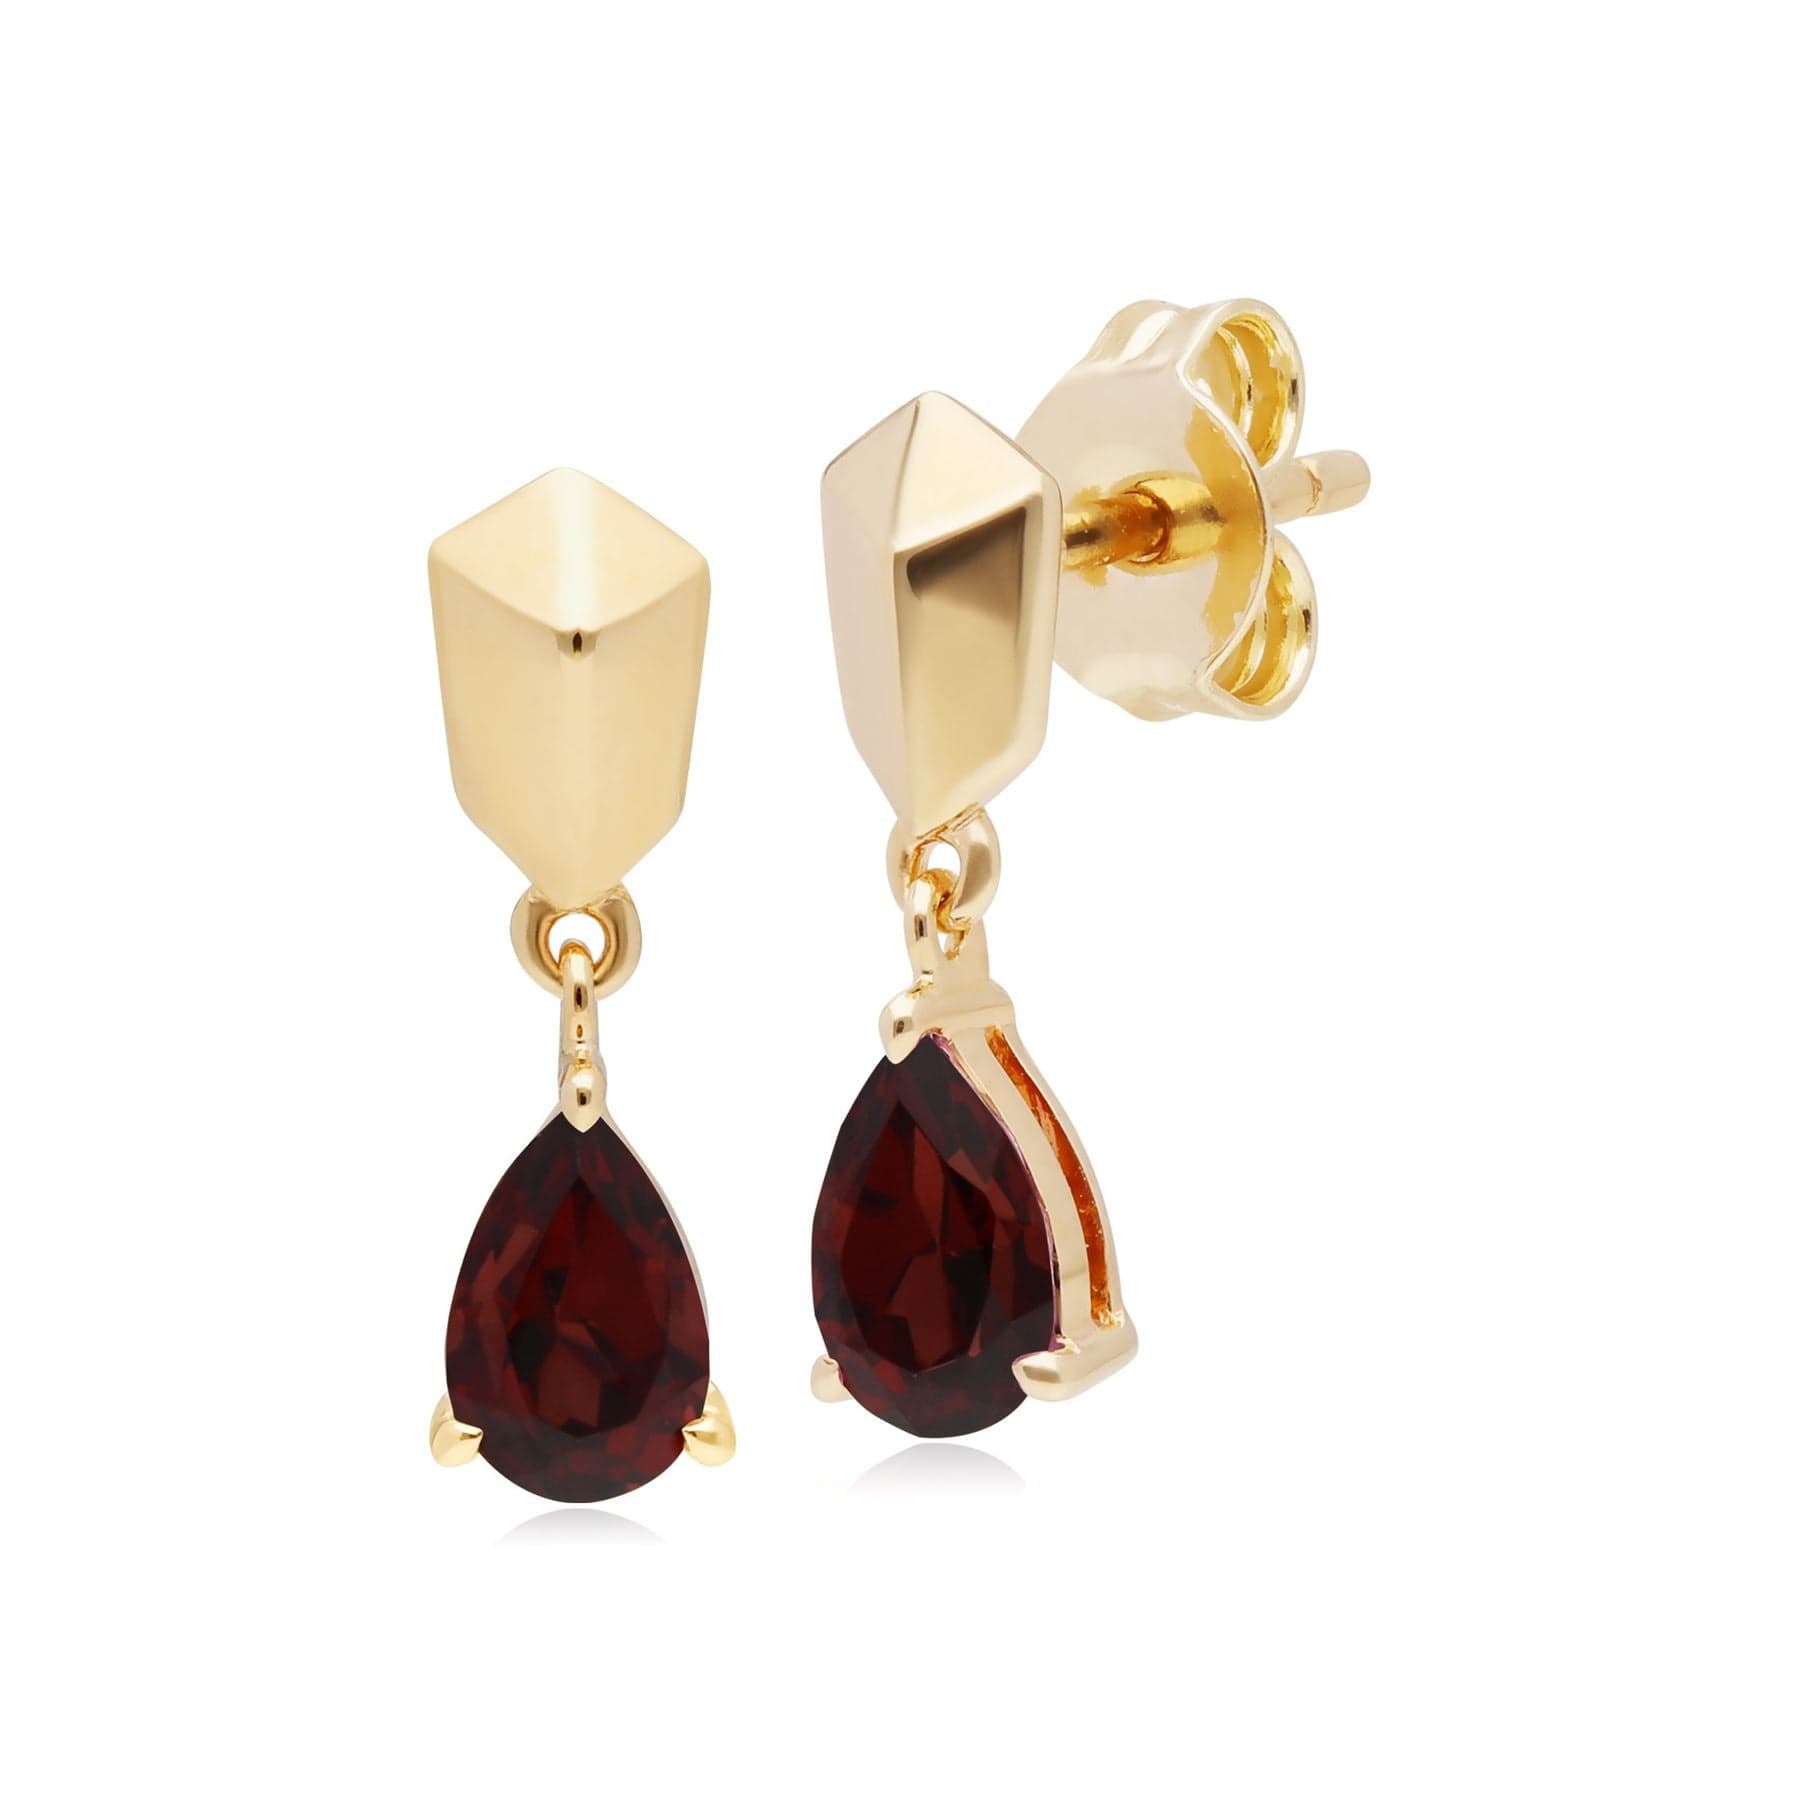 Micro Statement Garnet Drop Earrings in Yellow Gold Plated 925 Sterling Silver